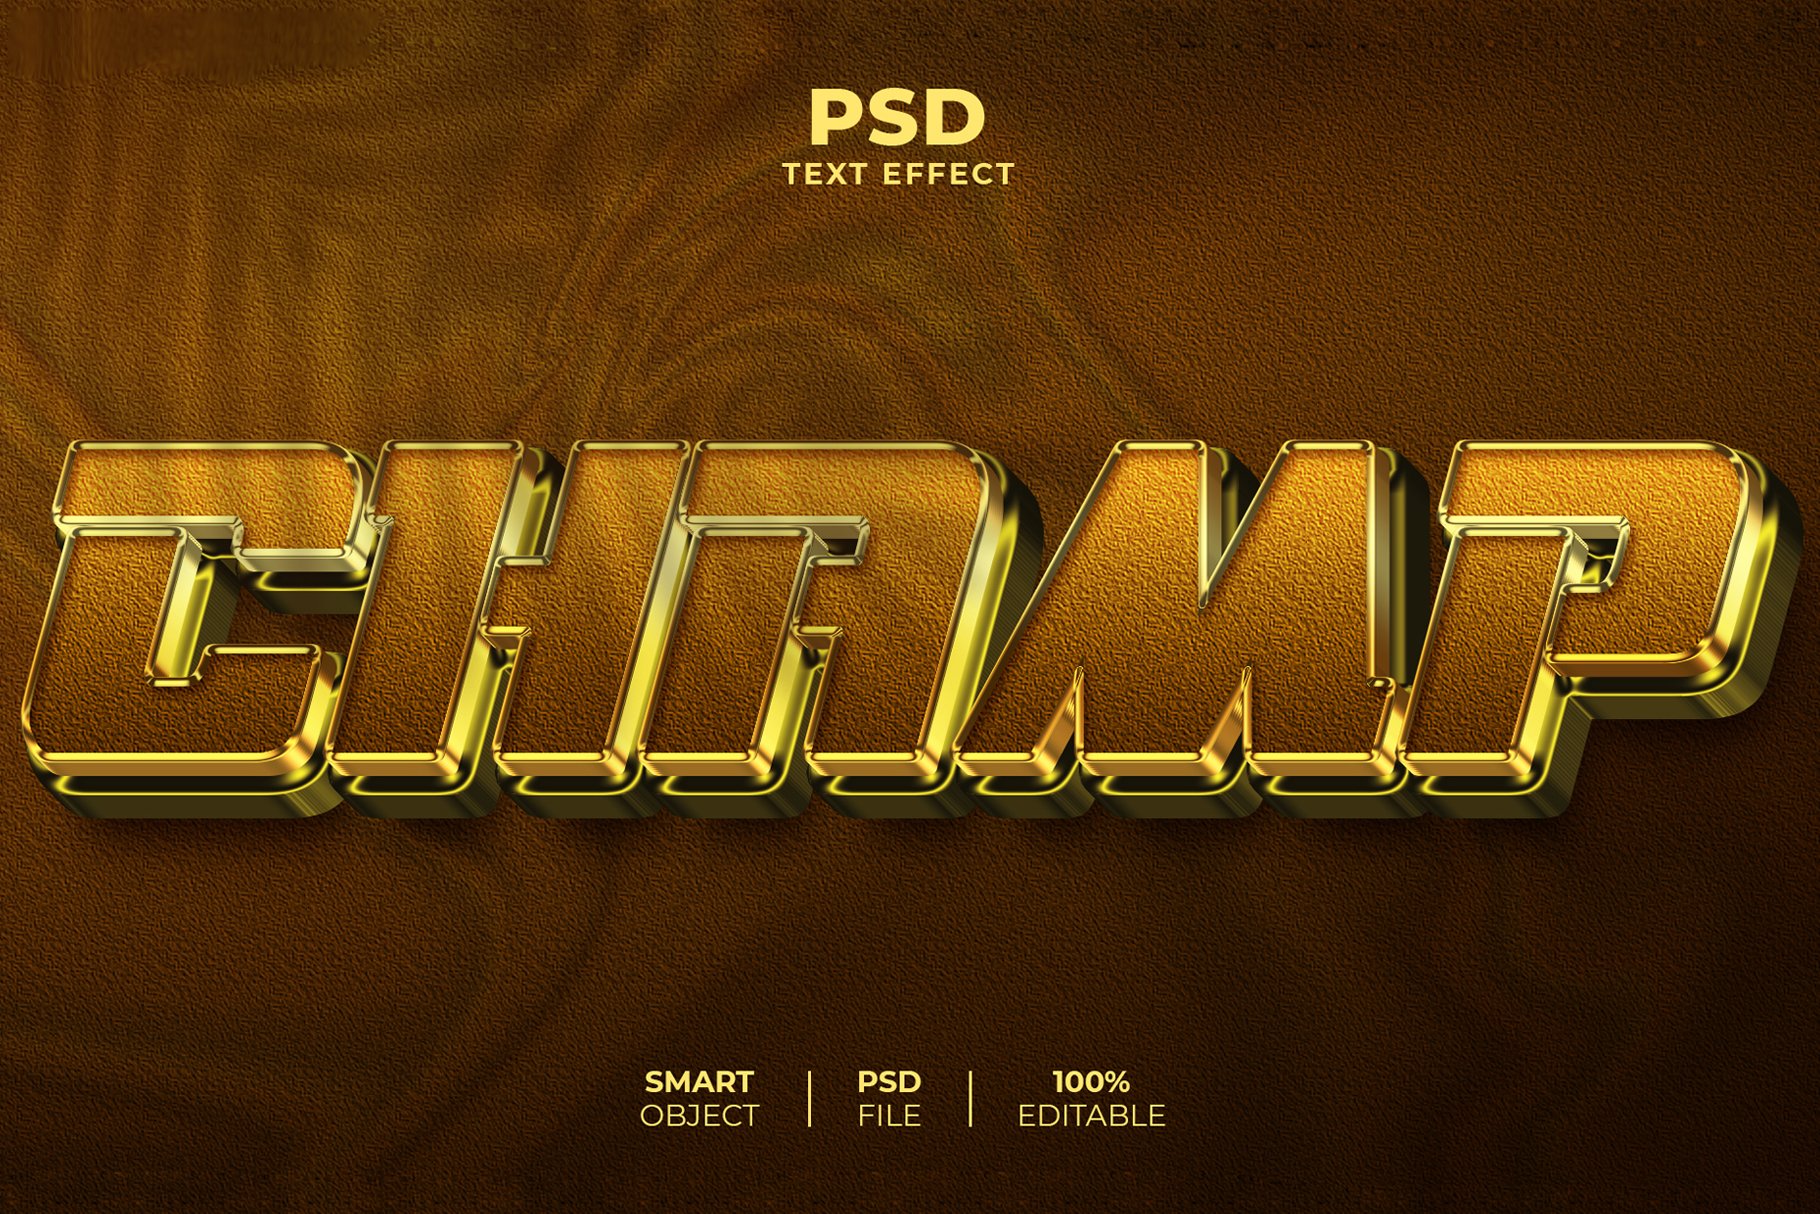 Champ 3D editable text effectcover image.